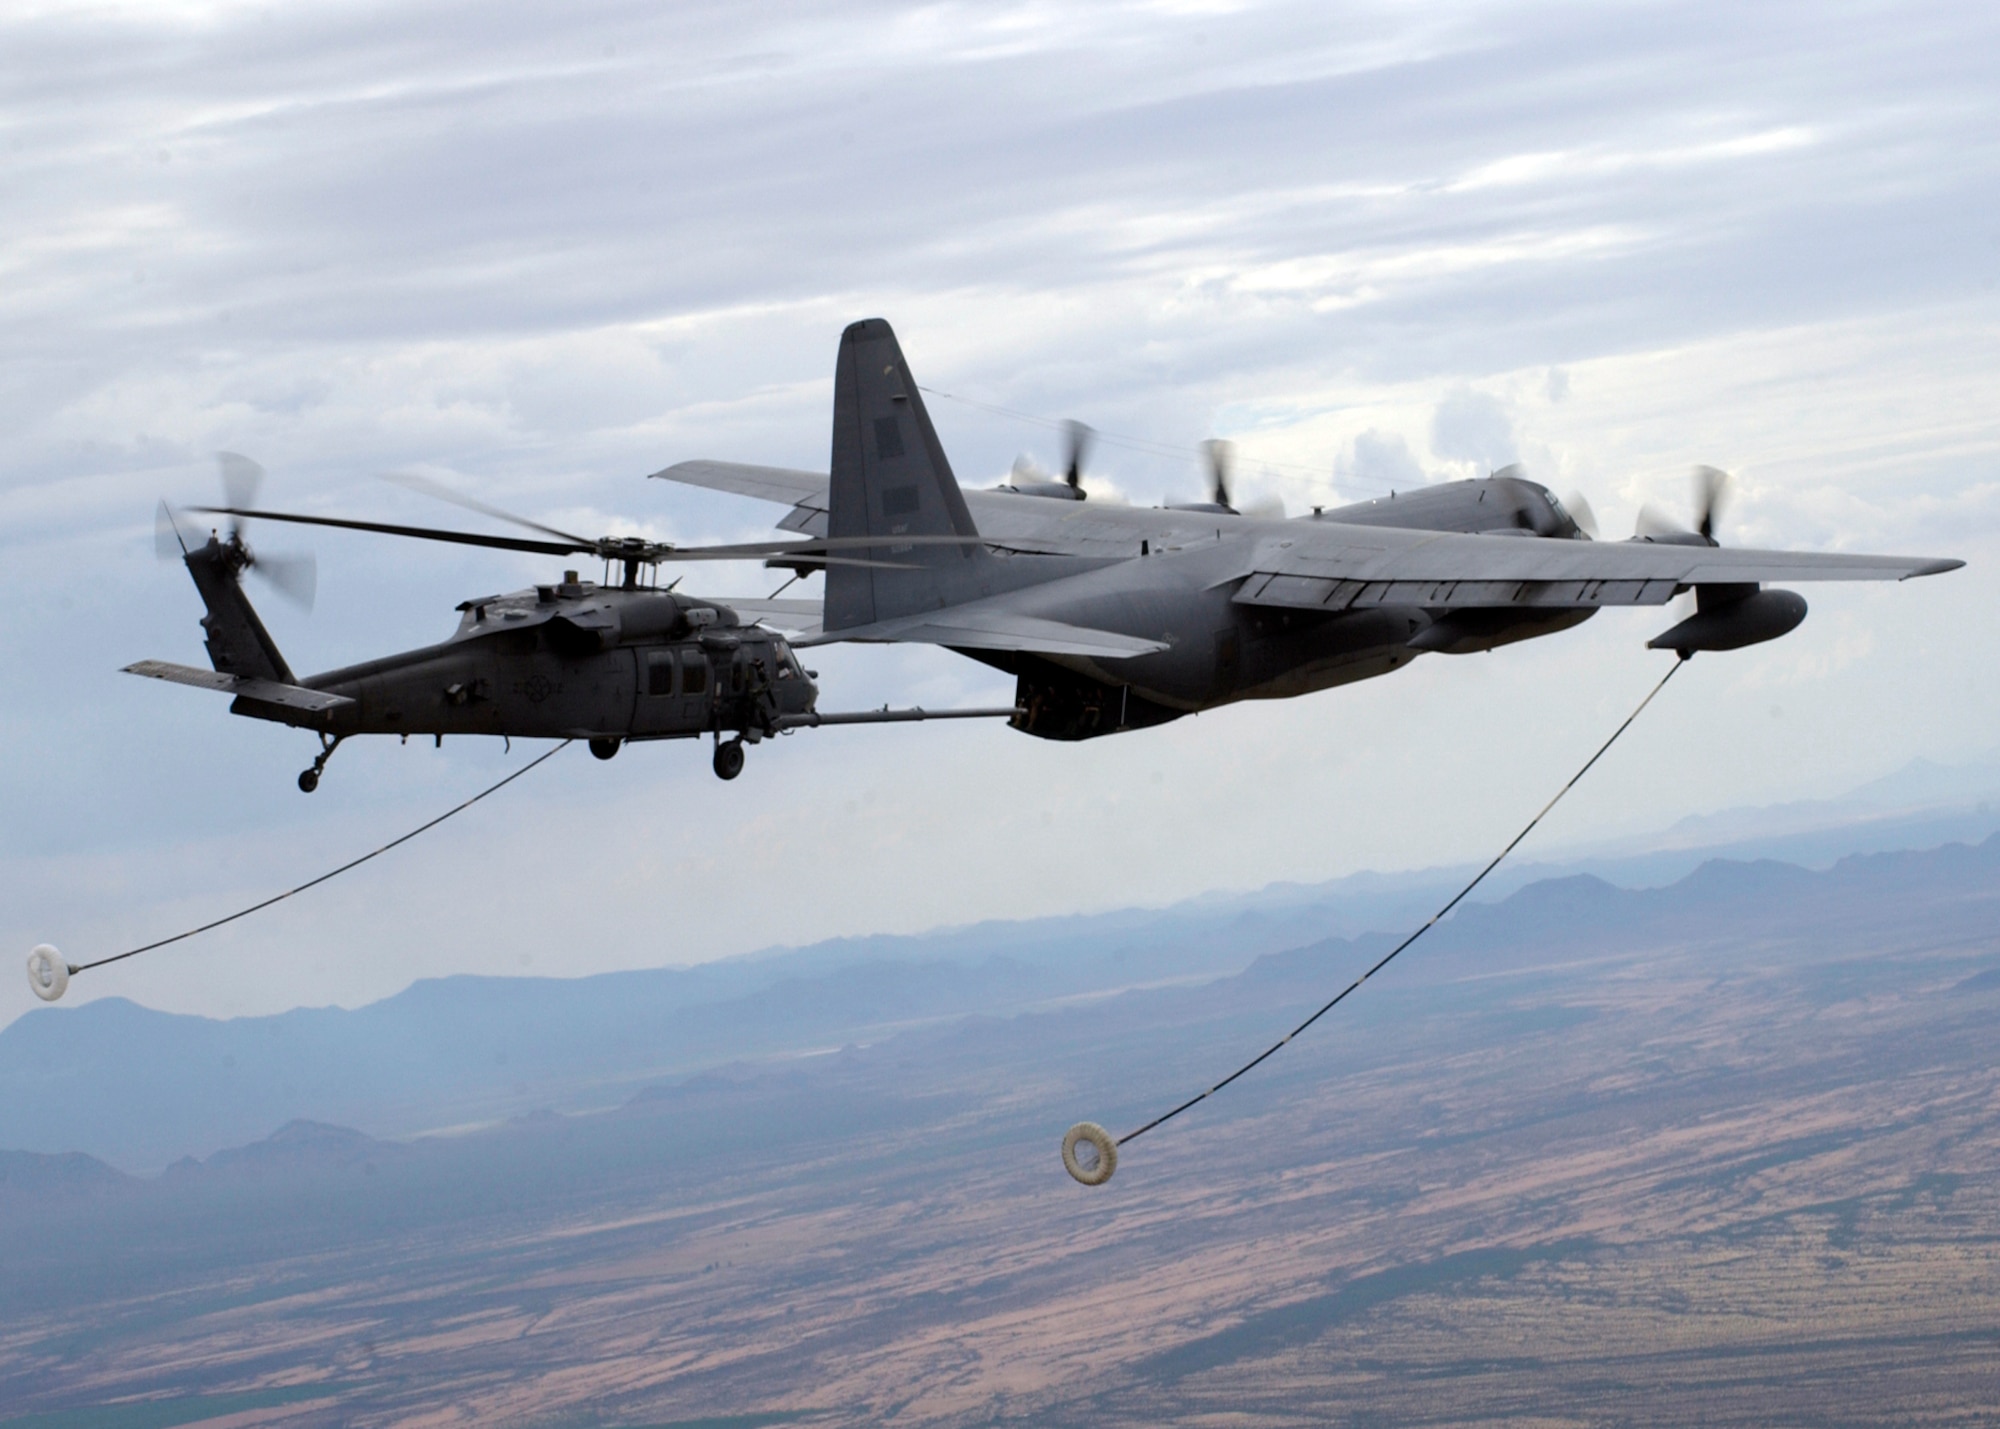 OVER ARIZONA -- An HH-60G Pave Hawk with the 55th Rescue Squadron maneuvers into position to refuel from an HC-130P/N with the 79th Rescue Squadron.  (U.S. Air Force photo by Airman 1st Class Veronica Pierce)